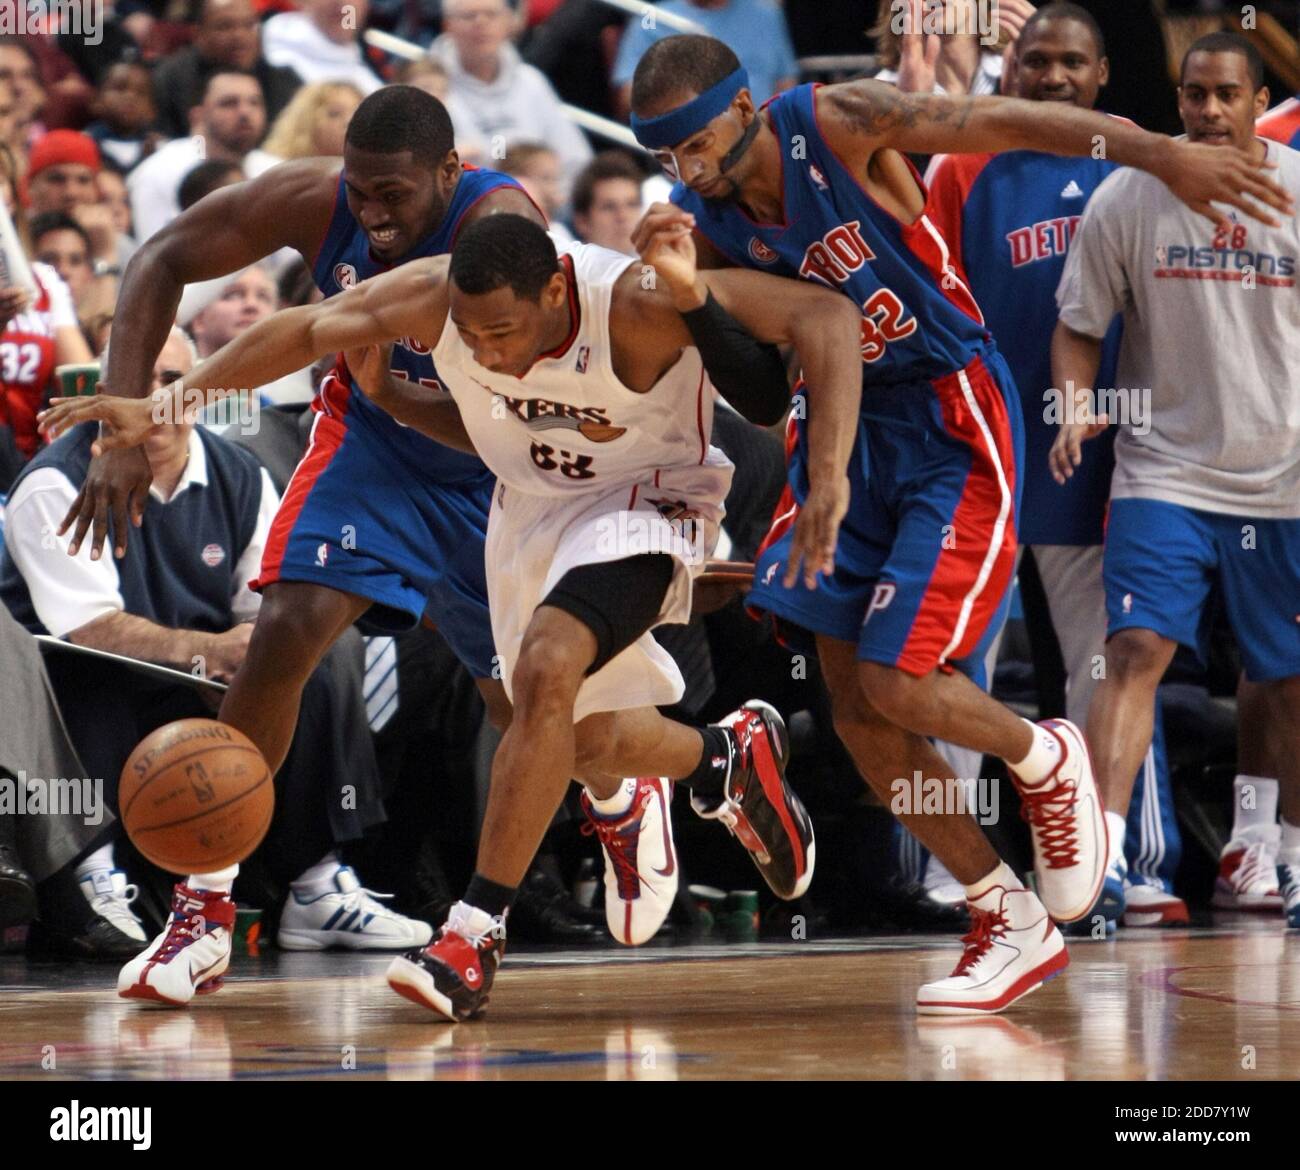 The Philadelphia 76ers' Willie Green (center) battles the Detroit Pistons Jason Maxiell (left) and Richard Hamilton for a loose ball during Game 4 of the first round of the NBA Eastern Conference Playoffs at the Wachovia Center in Philadelphia, PA, USA on April 27, 2008. The Pistons defeated the Sixers, 93-84. Photo by Jerry Lodriguss/Philadelphia Inquirer/MCT/Cameleon/ABACAPRESS.COM Stock Photo